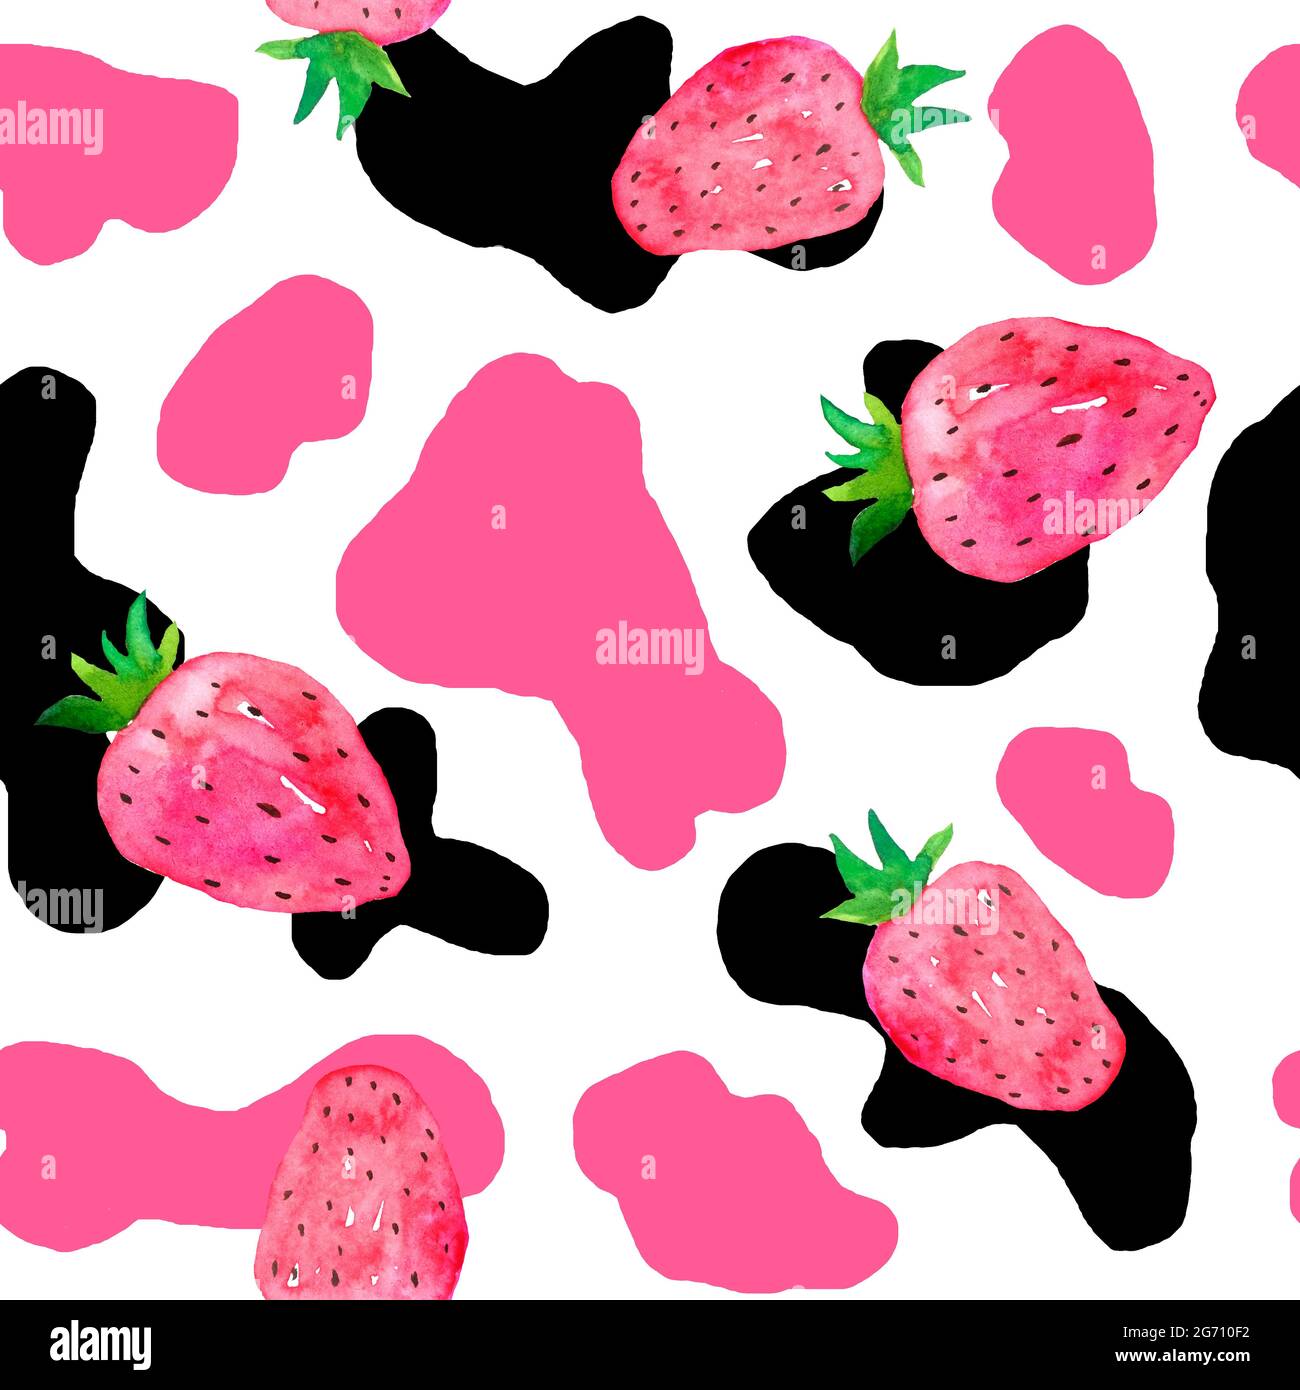 Watercolor Hand Drawn Seamless Cow Print Fabric Pattern Black White Pastel Strawberry Pink Colors Cowboy Cow Girl Western Background Illustration Design Milk Farm Wallpaper Stock Photo Alamy